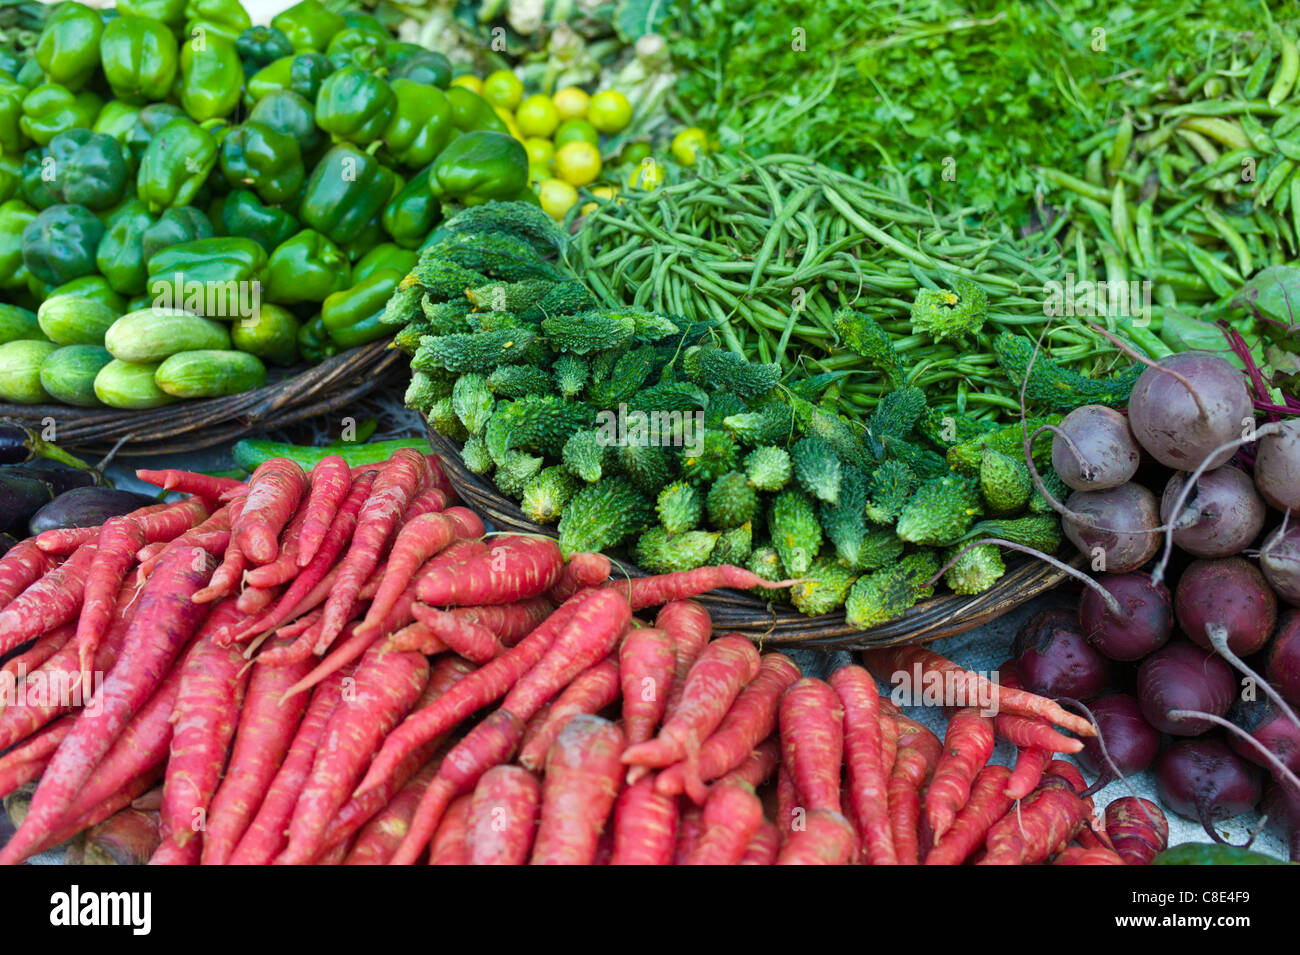 Fresh vegetables, carrots, green peppers, beetroot, beans, cucumbers, peas on sale at market stall in Varanasi, Benares, India Stock Photo